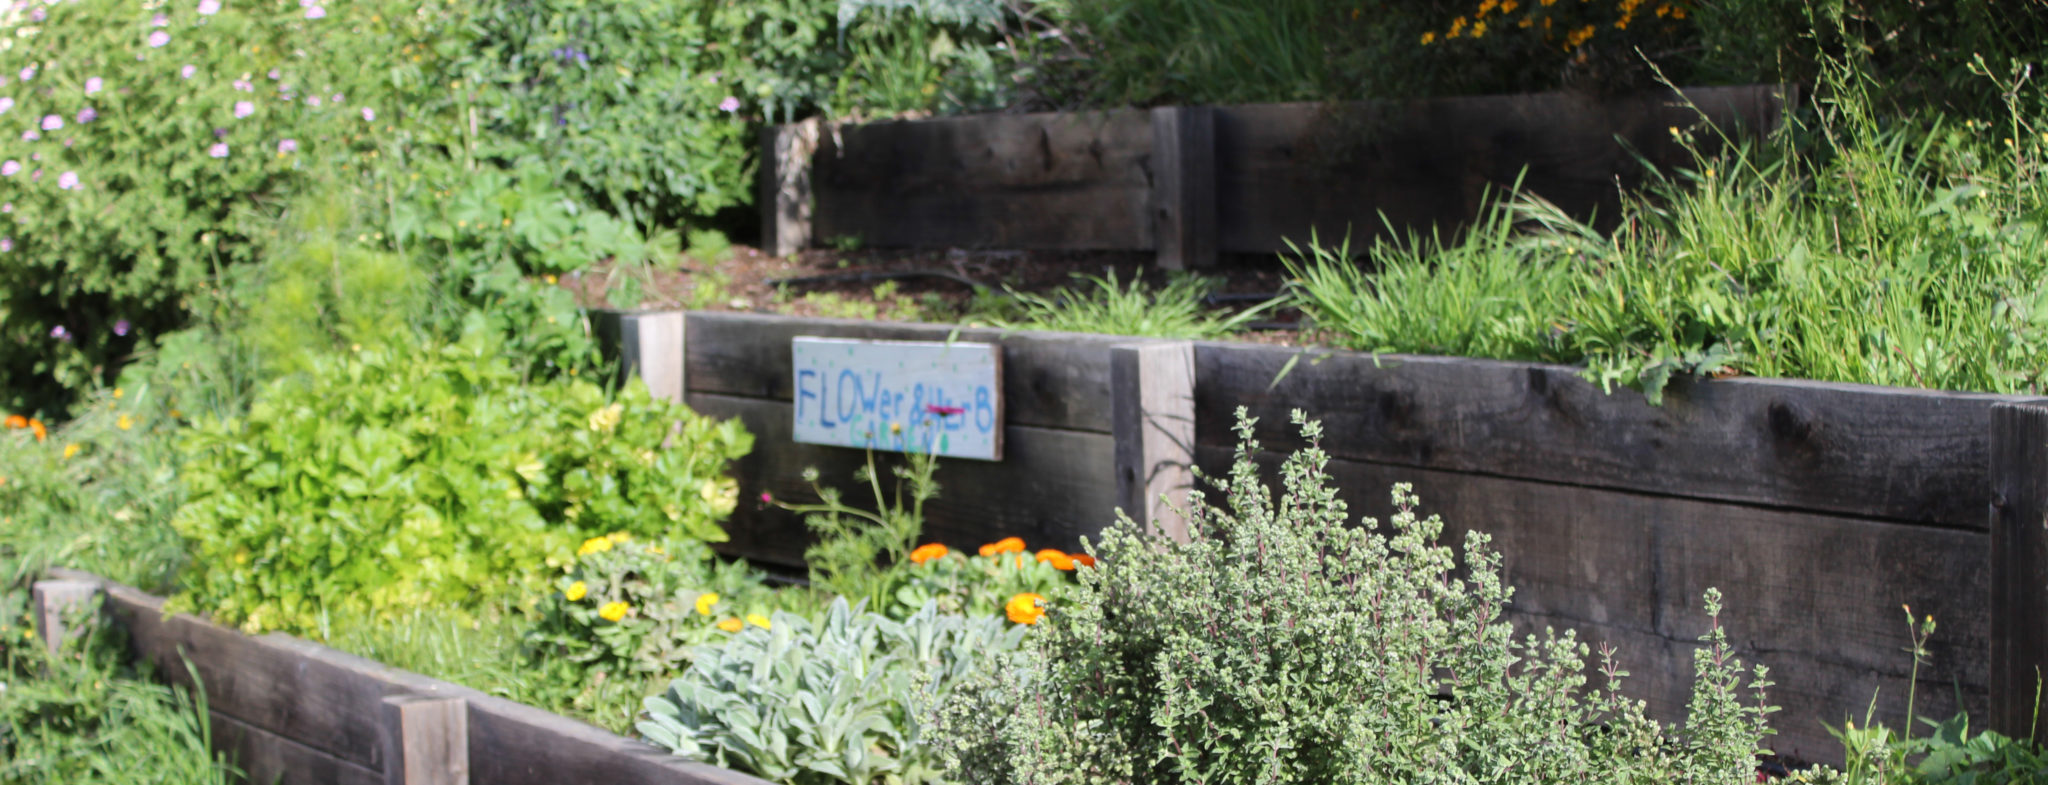 A sign that says "Flowers" in a garden